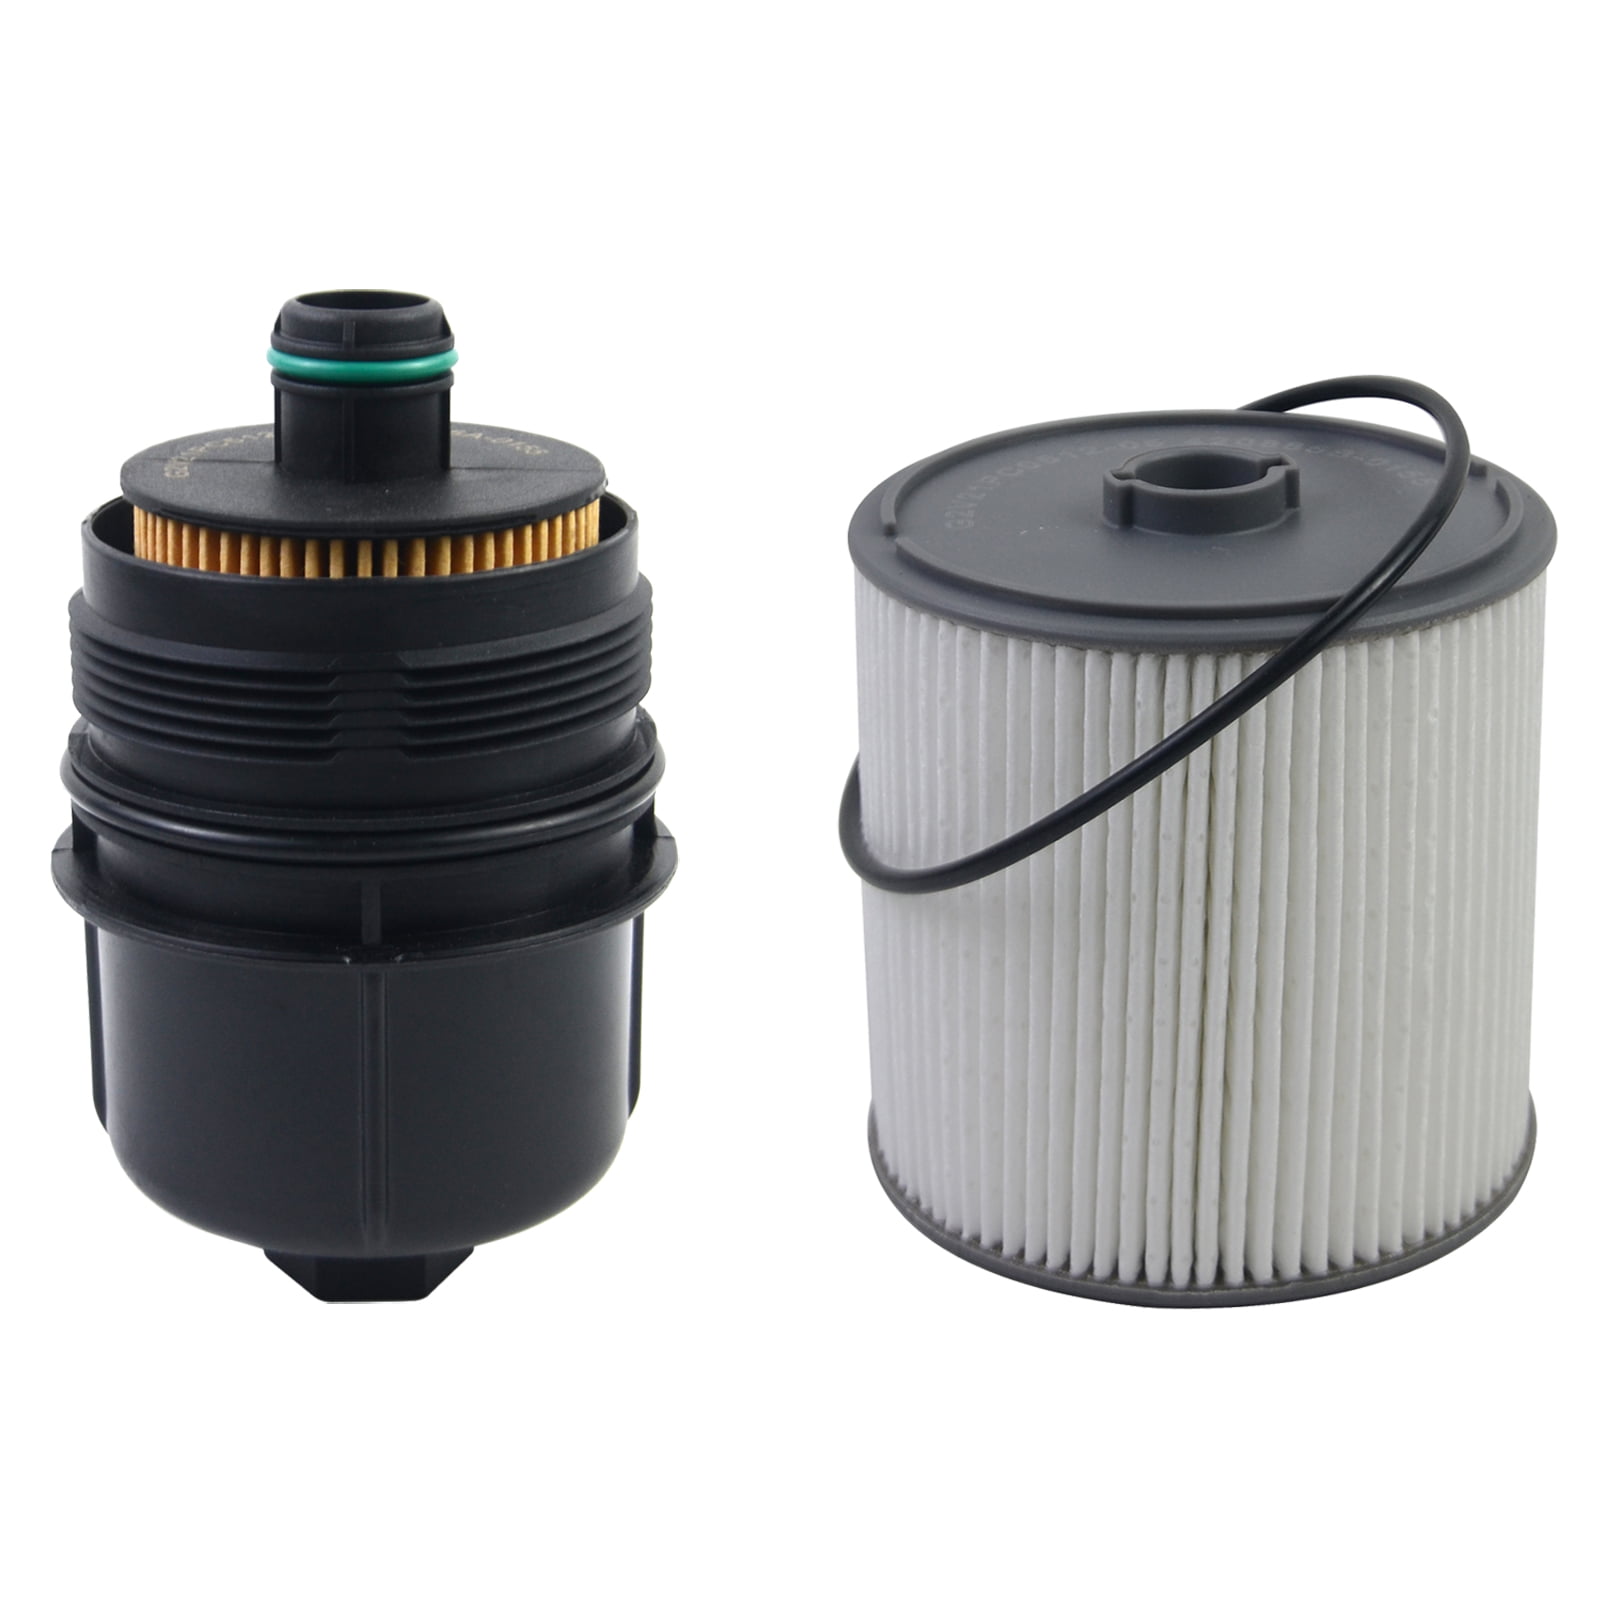 Engine Oil Filter Compatible With 2020 Dodge Ram 1500 Jeep Wrangler JL 3.0L Diesel Replace 68507598AA 